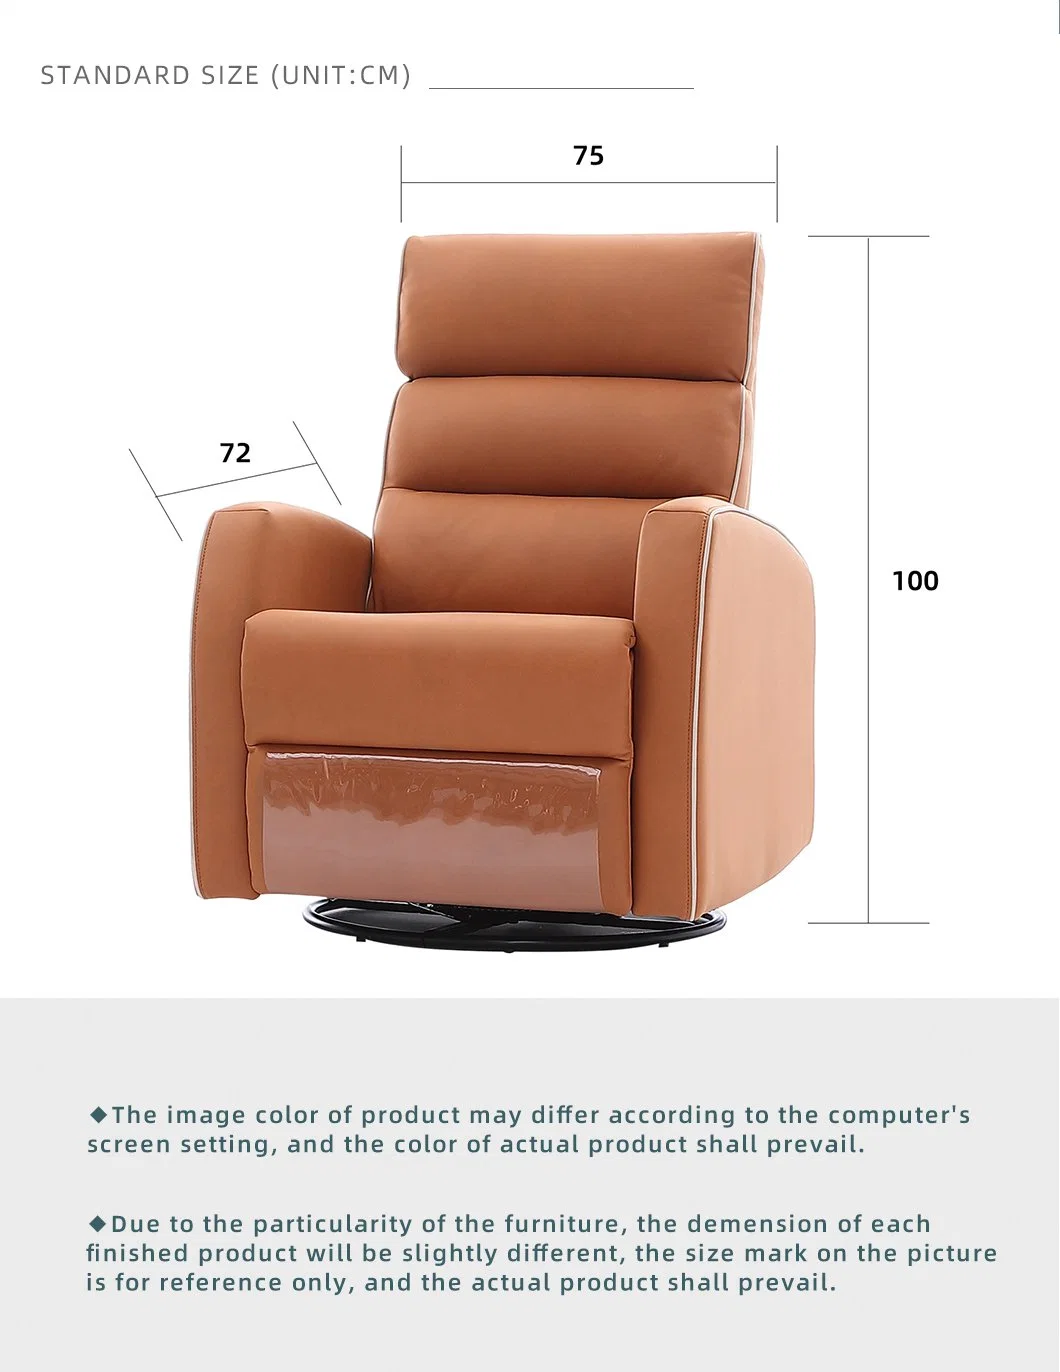 School Computer Leather Adjustable Recliner Sofa Message Chair for Home Living Room Furniture